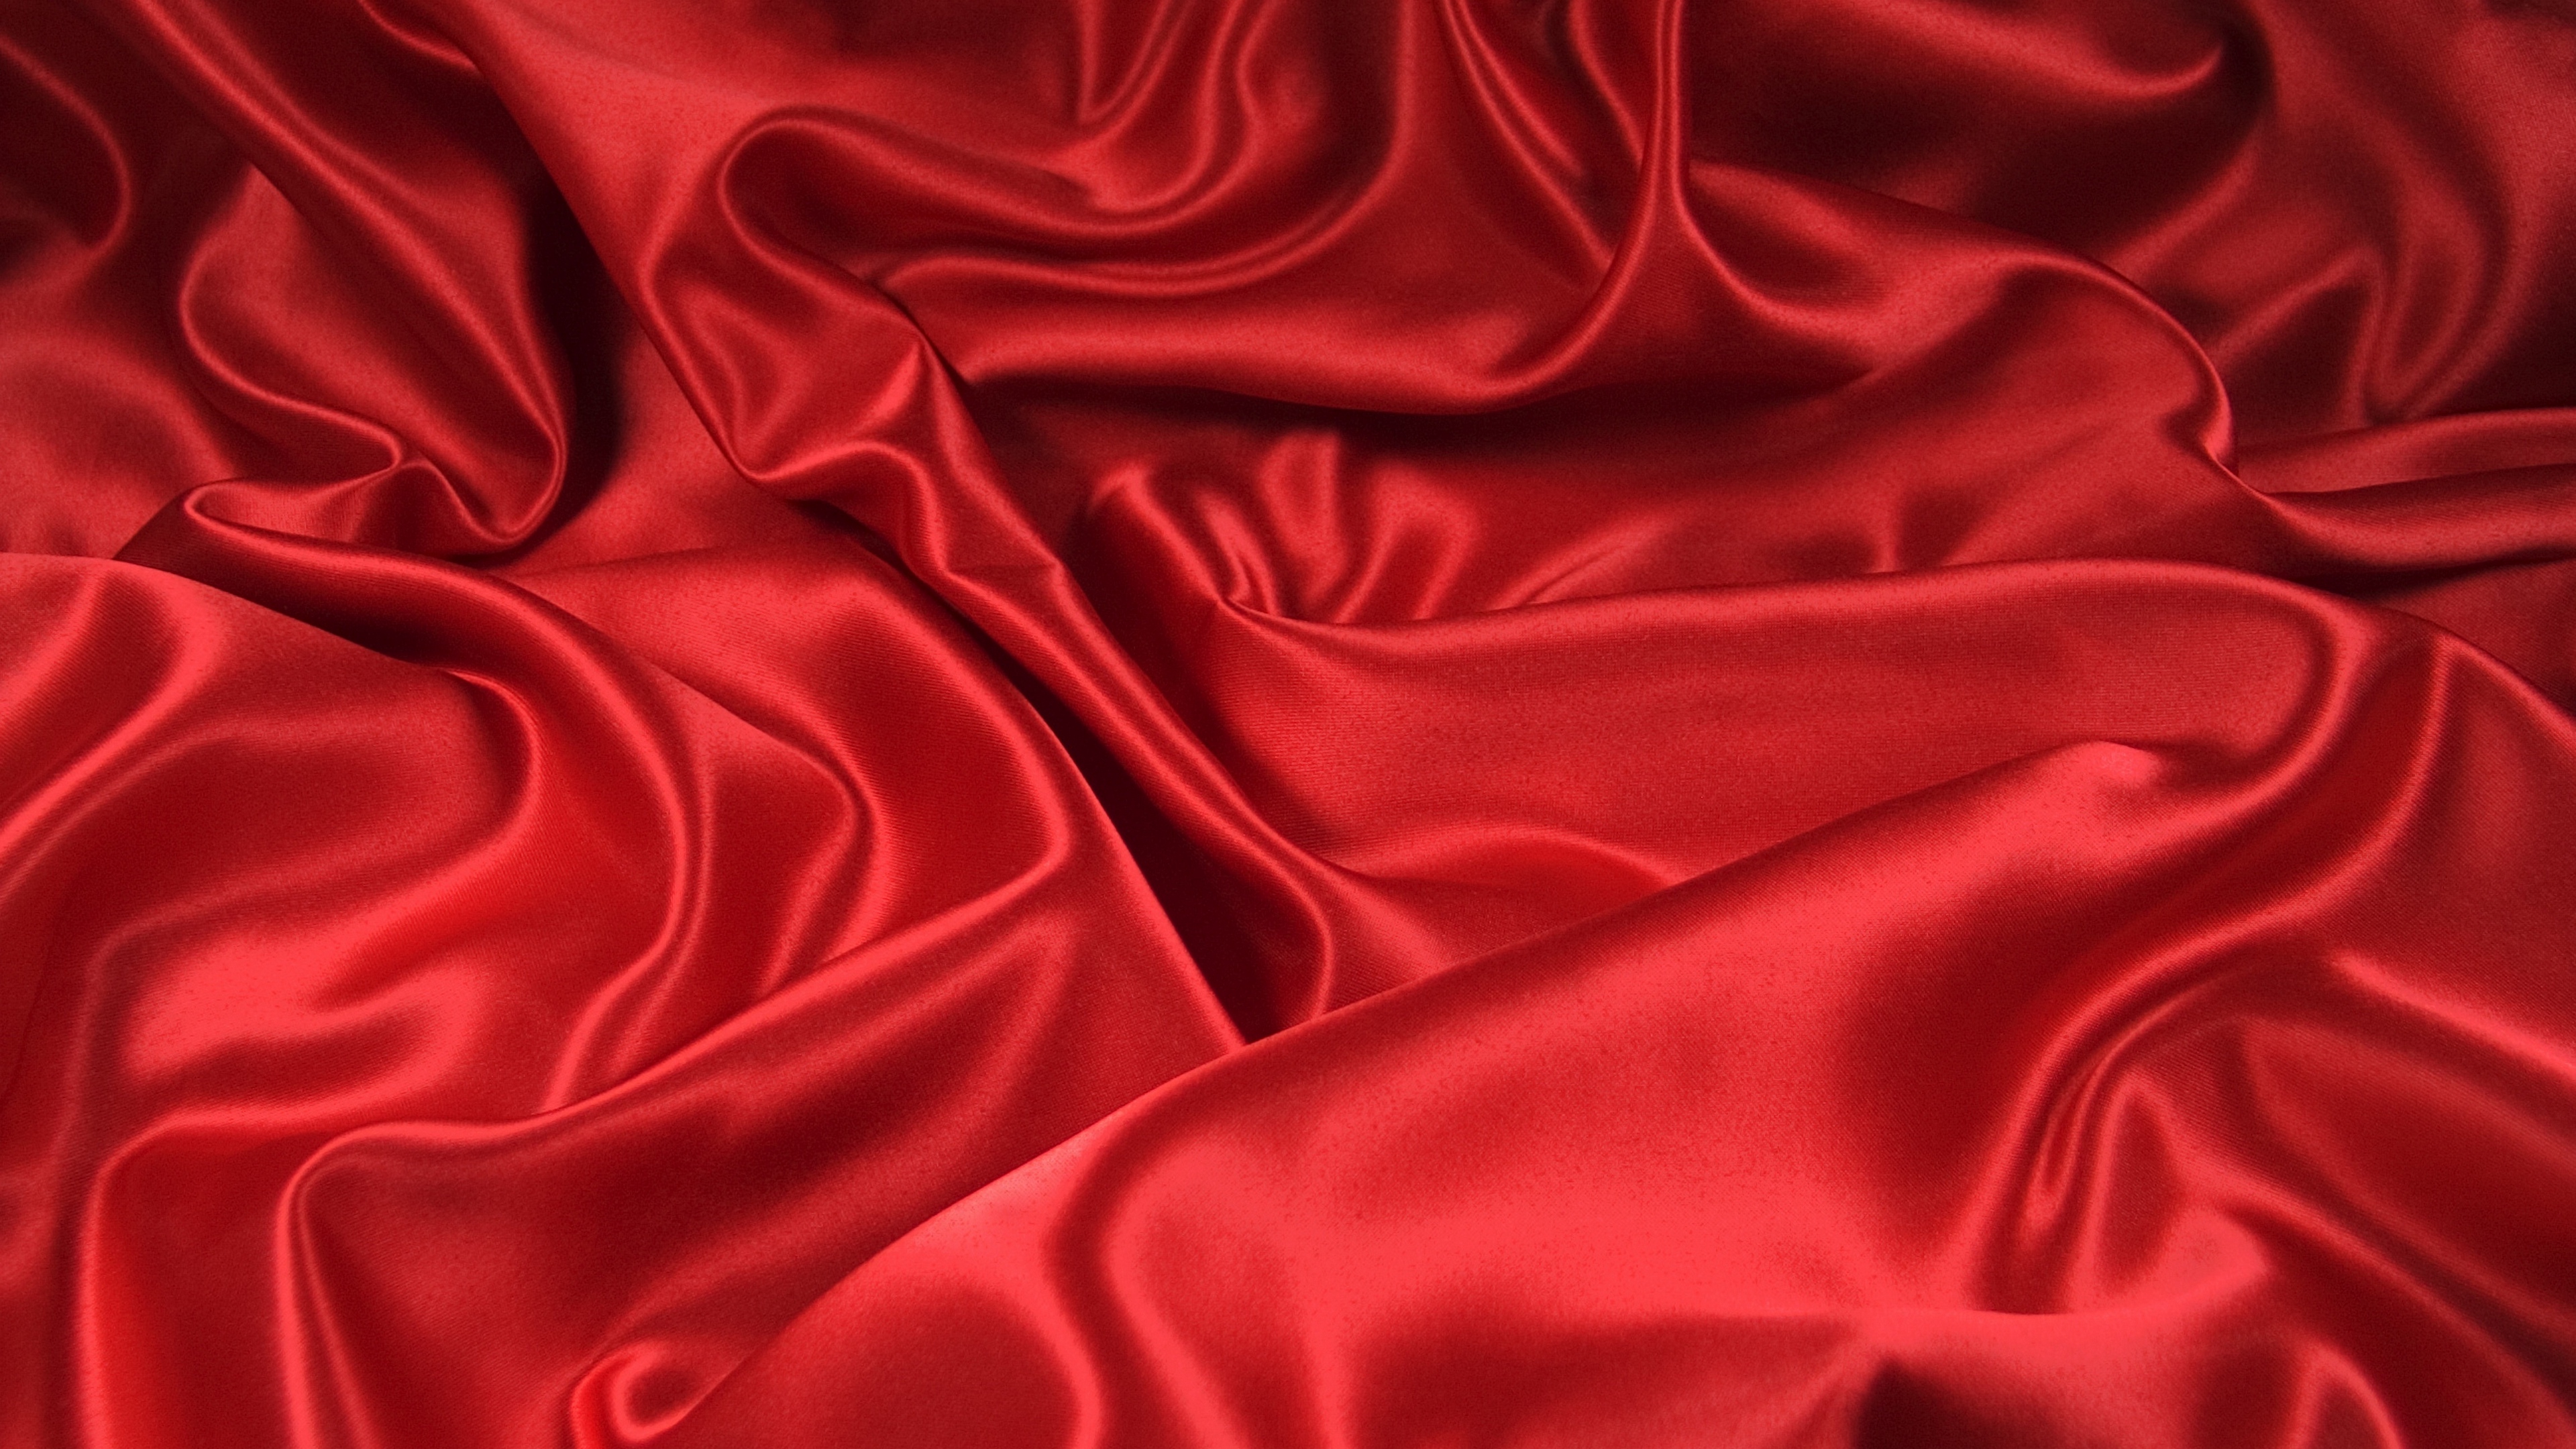 bends fabric folds red 4k 1536097792 - bends, fabric, folds, red 4k - folds, Fabric, bends